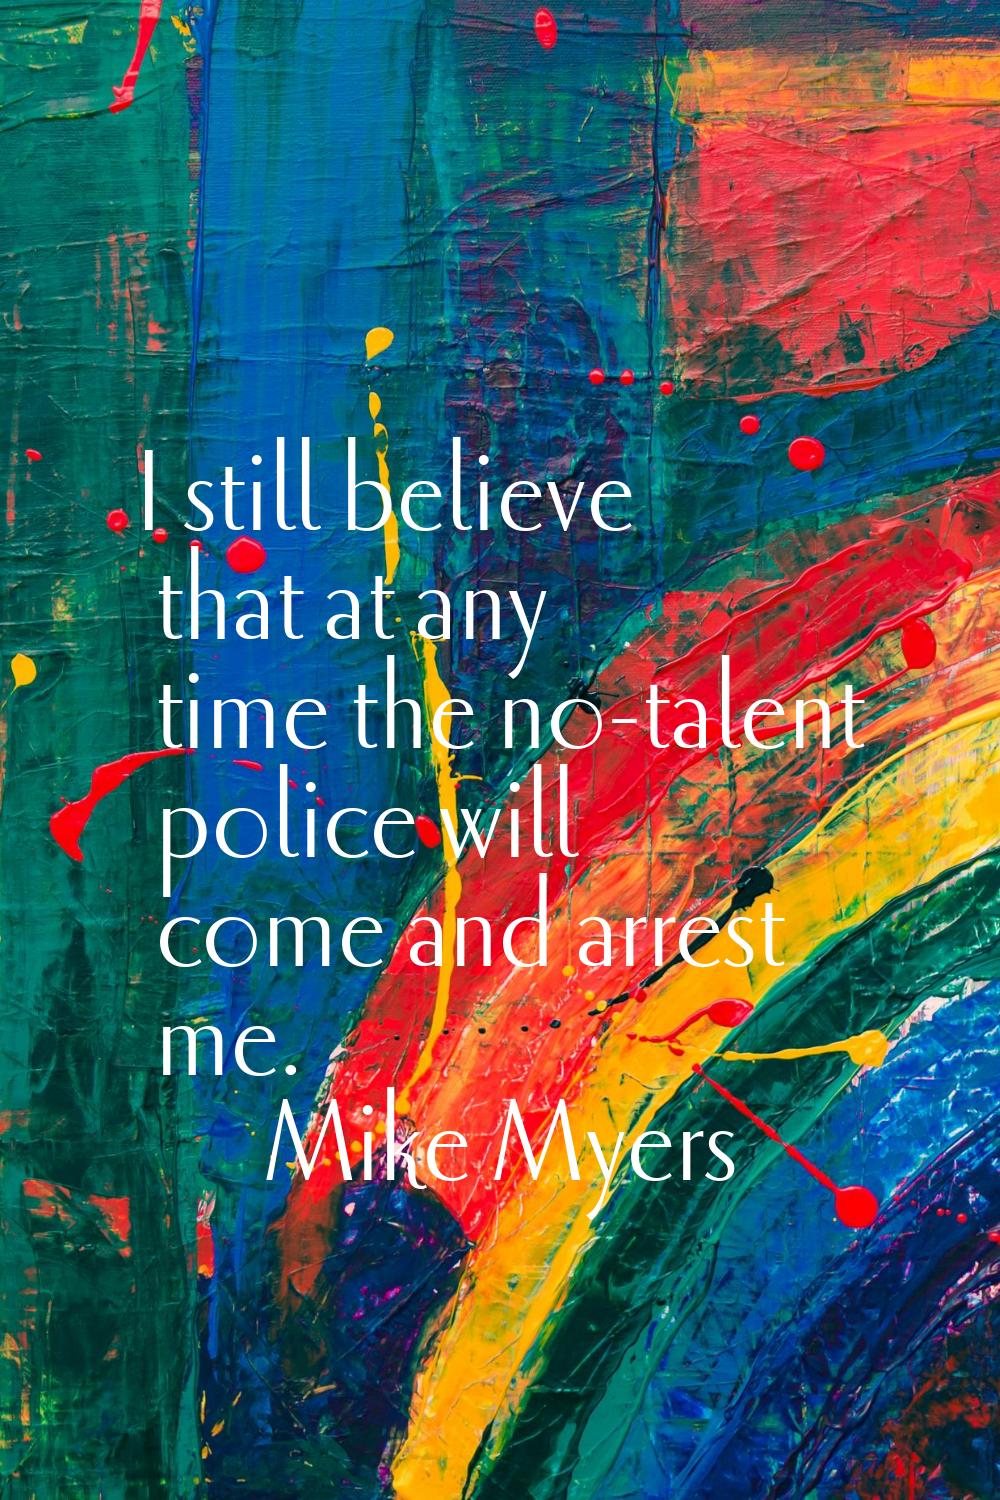 I still believe that at any time the no-talent police will come and arrest me.